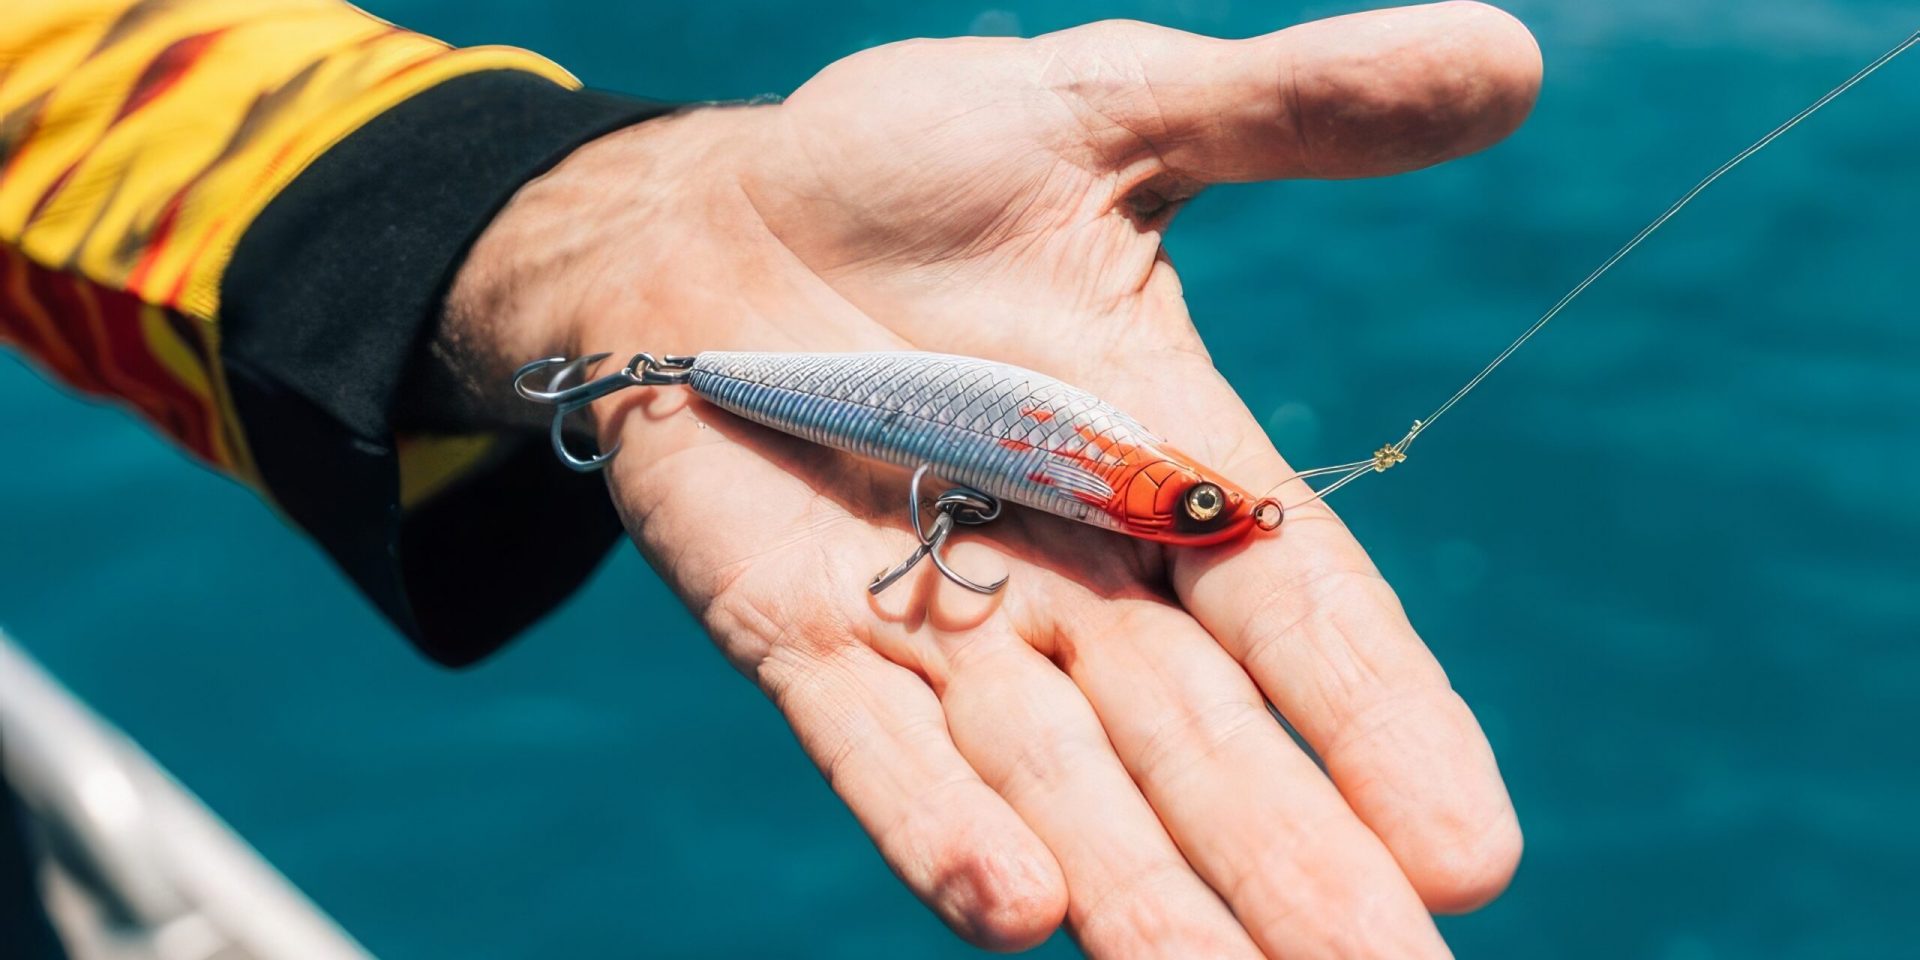 How to Change out Treble Hooks on Lures 2 Different Ways! (Quick